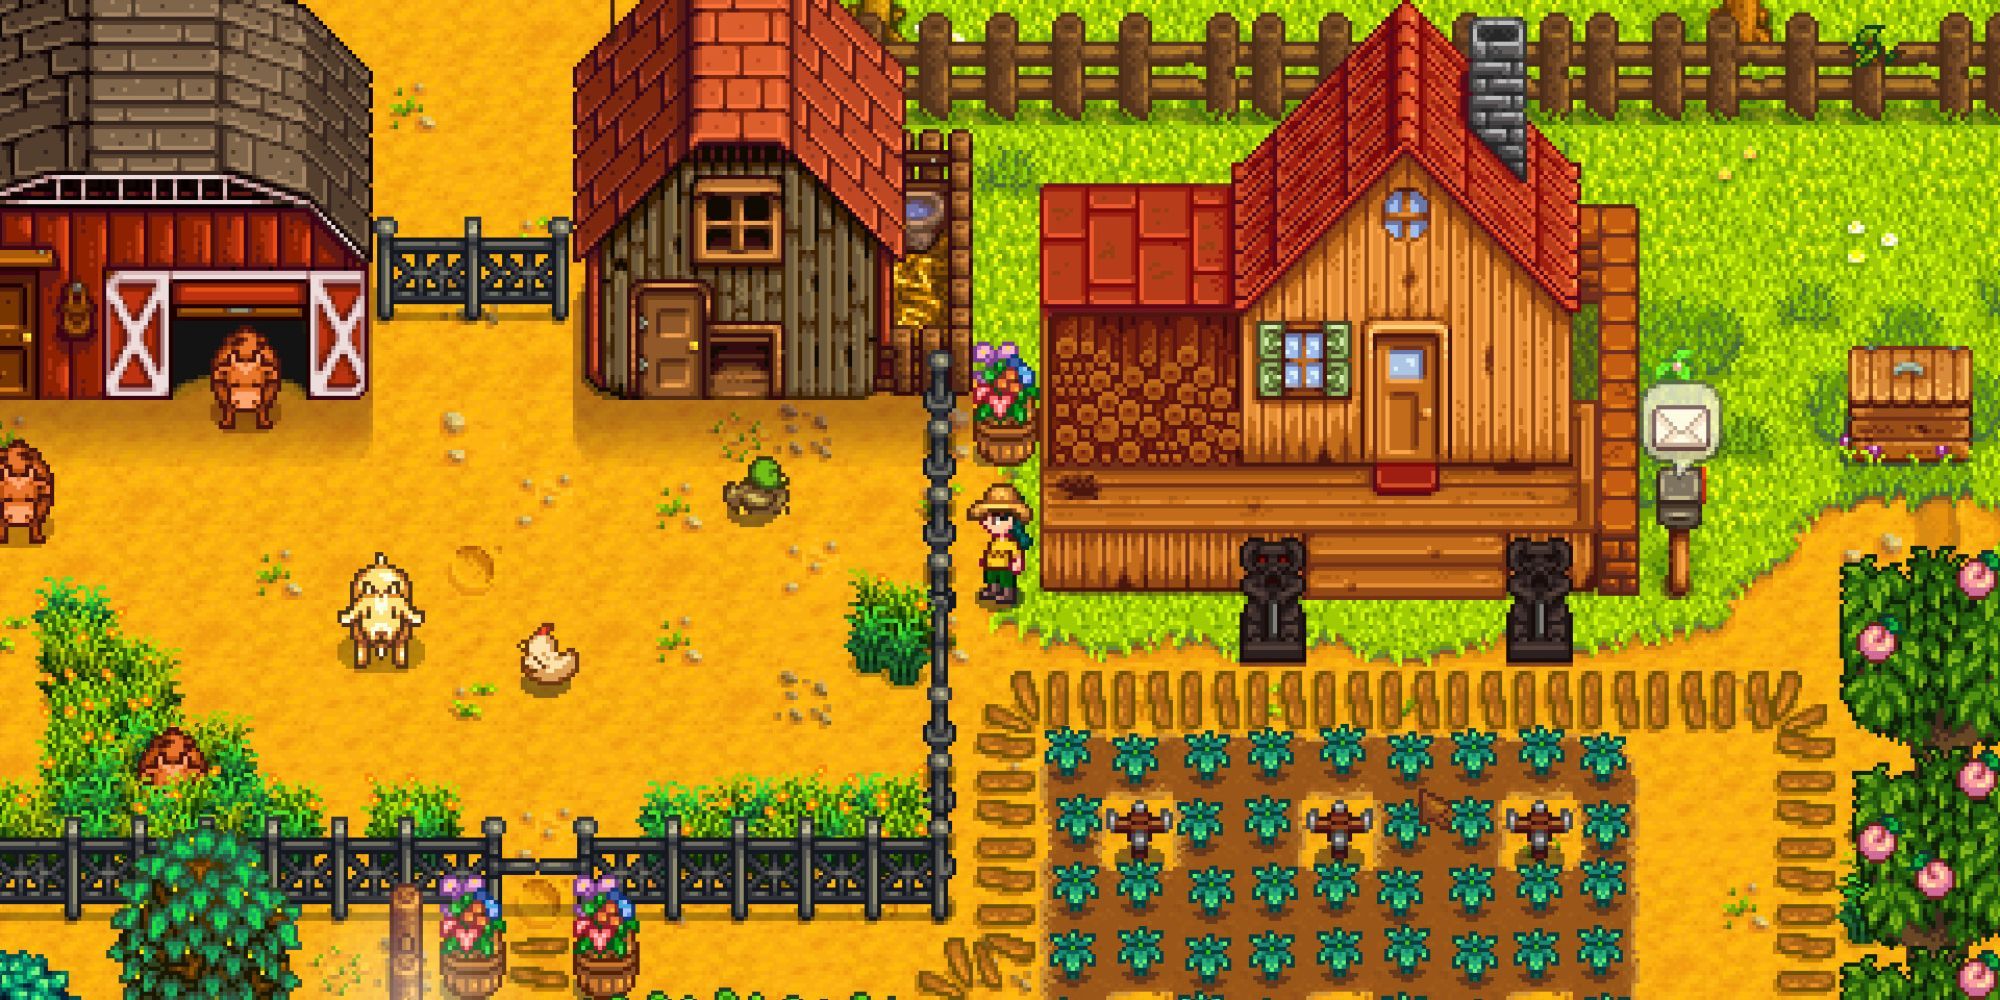 A player staring at their chickens in Stardew Valley